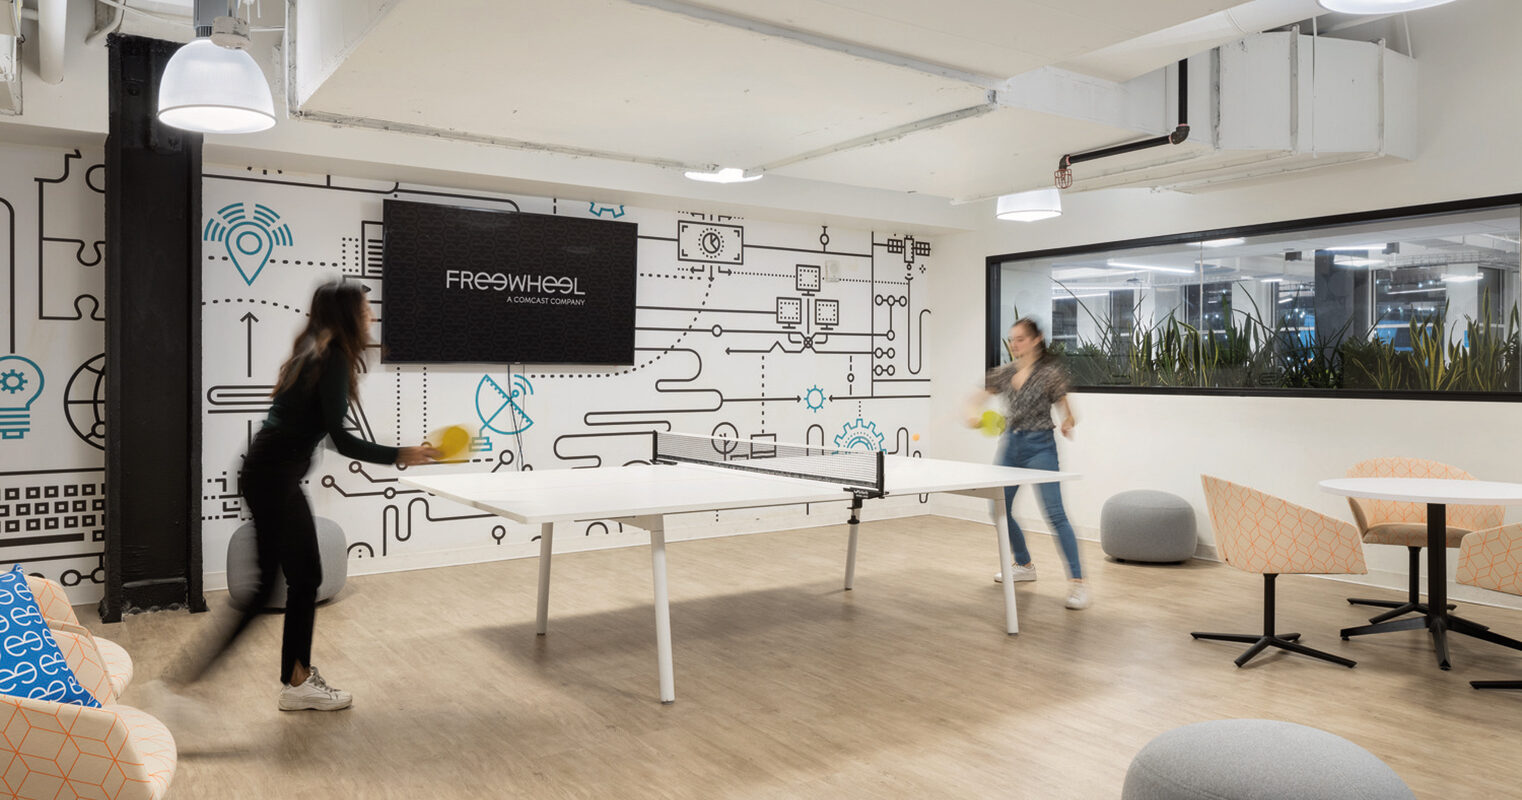 Modern office break room with playful illustrations on accent wall, ping-pong table for recreation, vibrant armchairs, and indoor greenery, integrating leisure with a creative work environment.